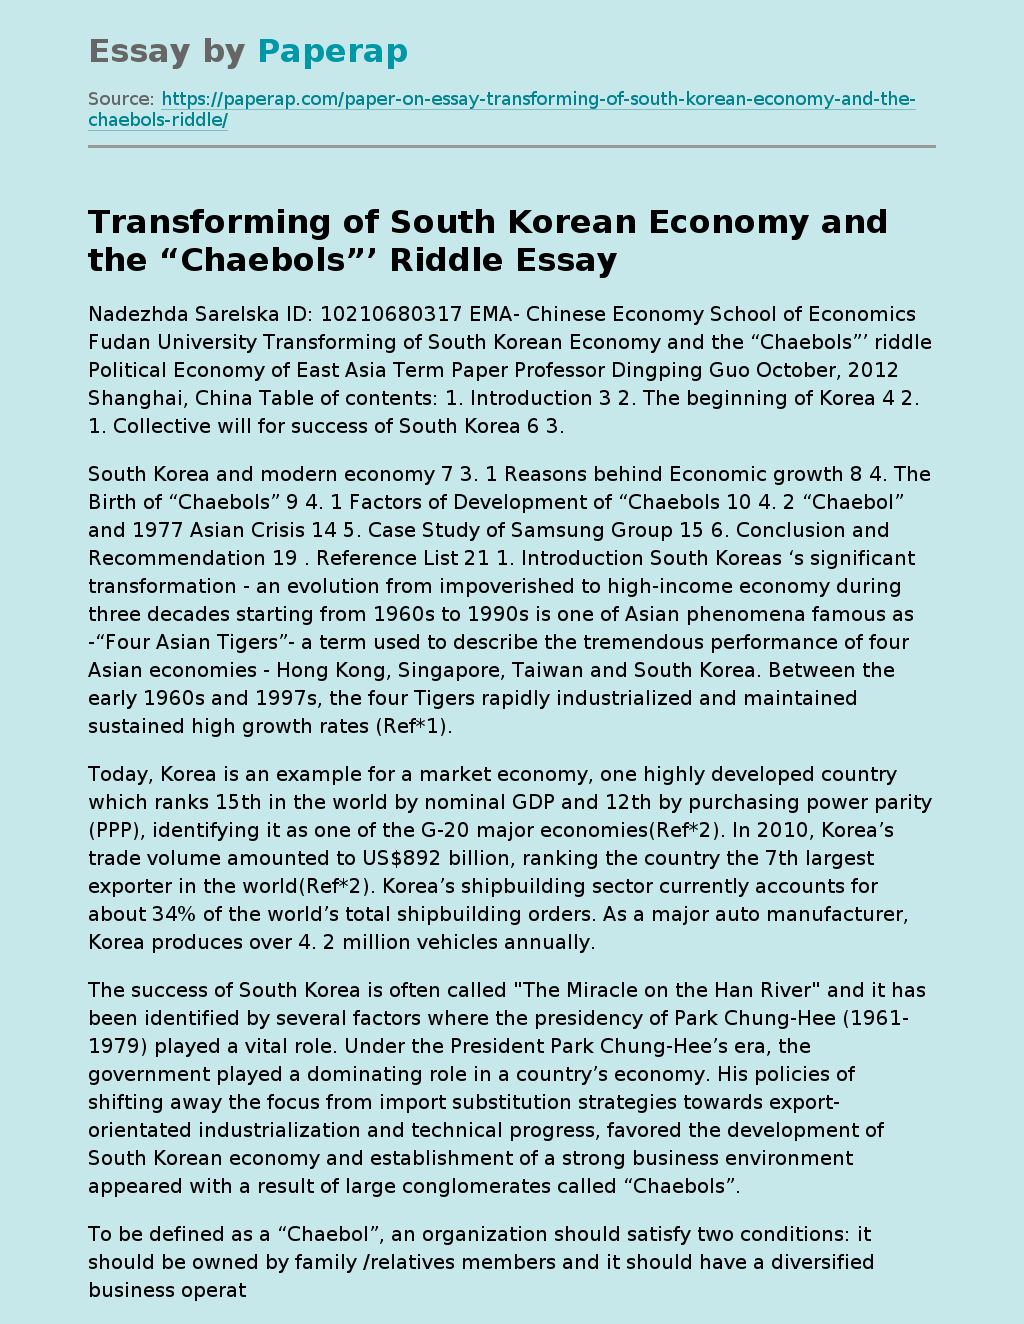 Transforming of South Korean Economy and the “Chaebols”’ Riddle